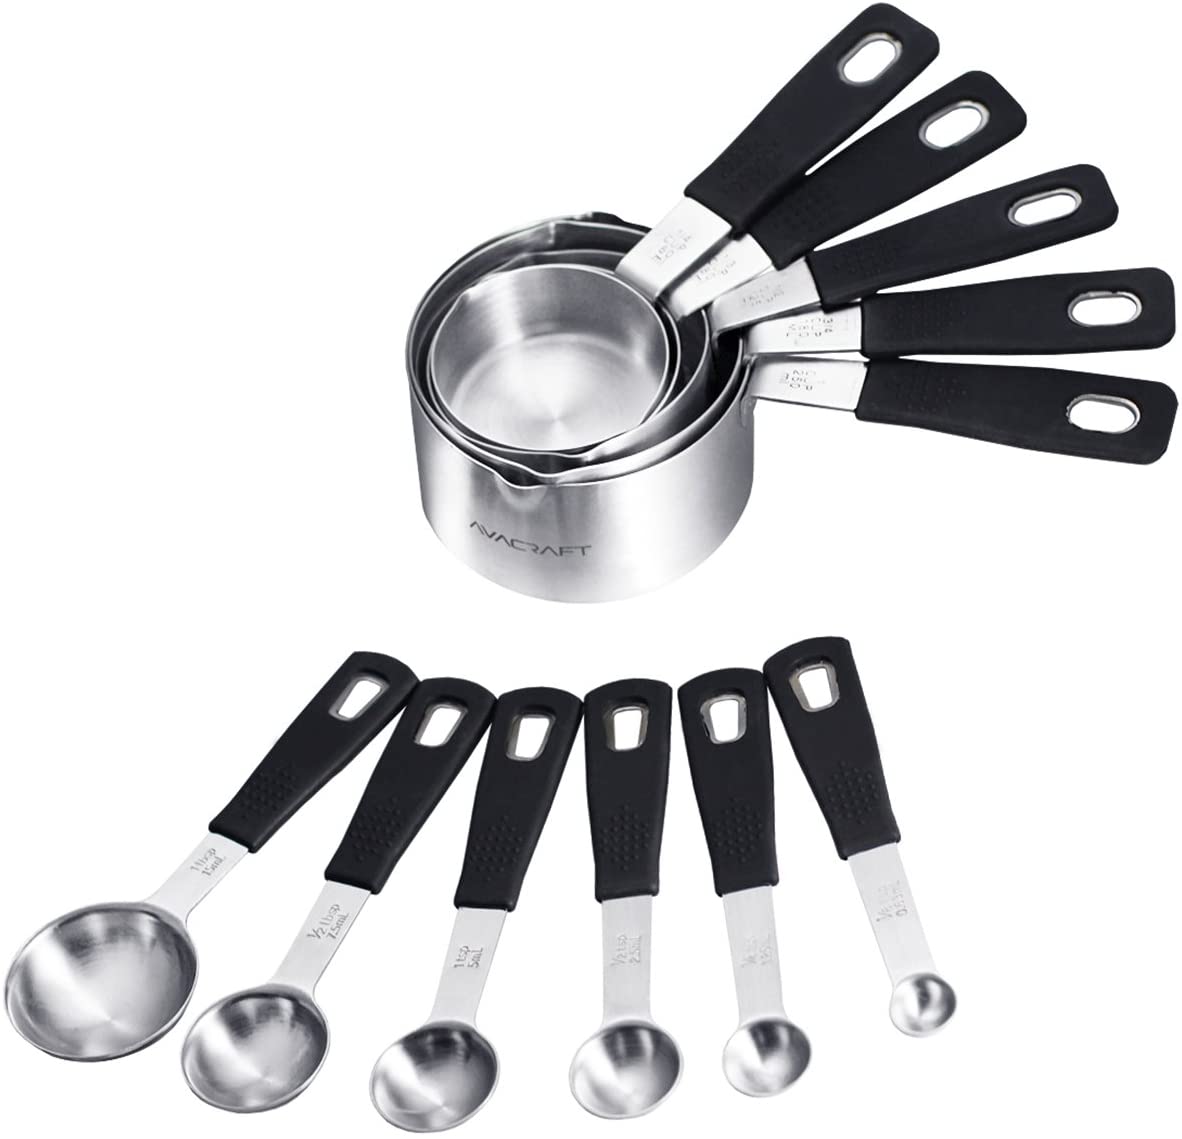 Collapsible Measuring Cup and Spoon Set – The Handi Cook